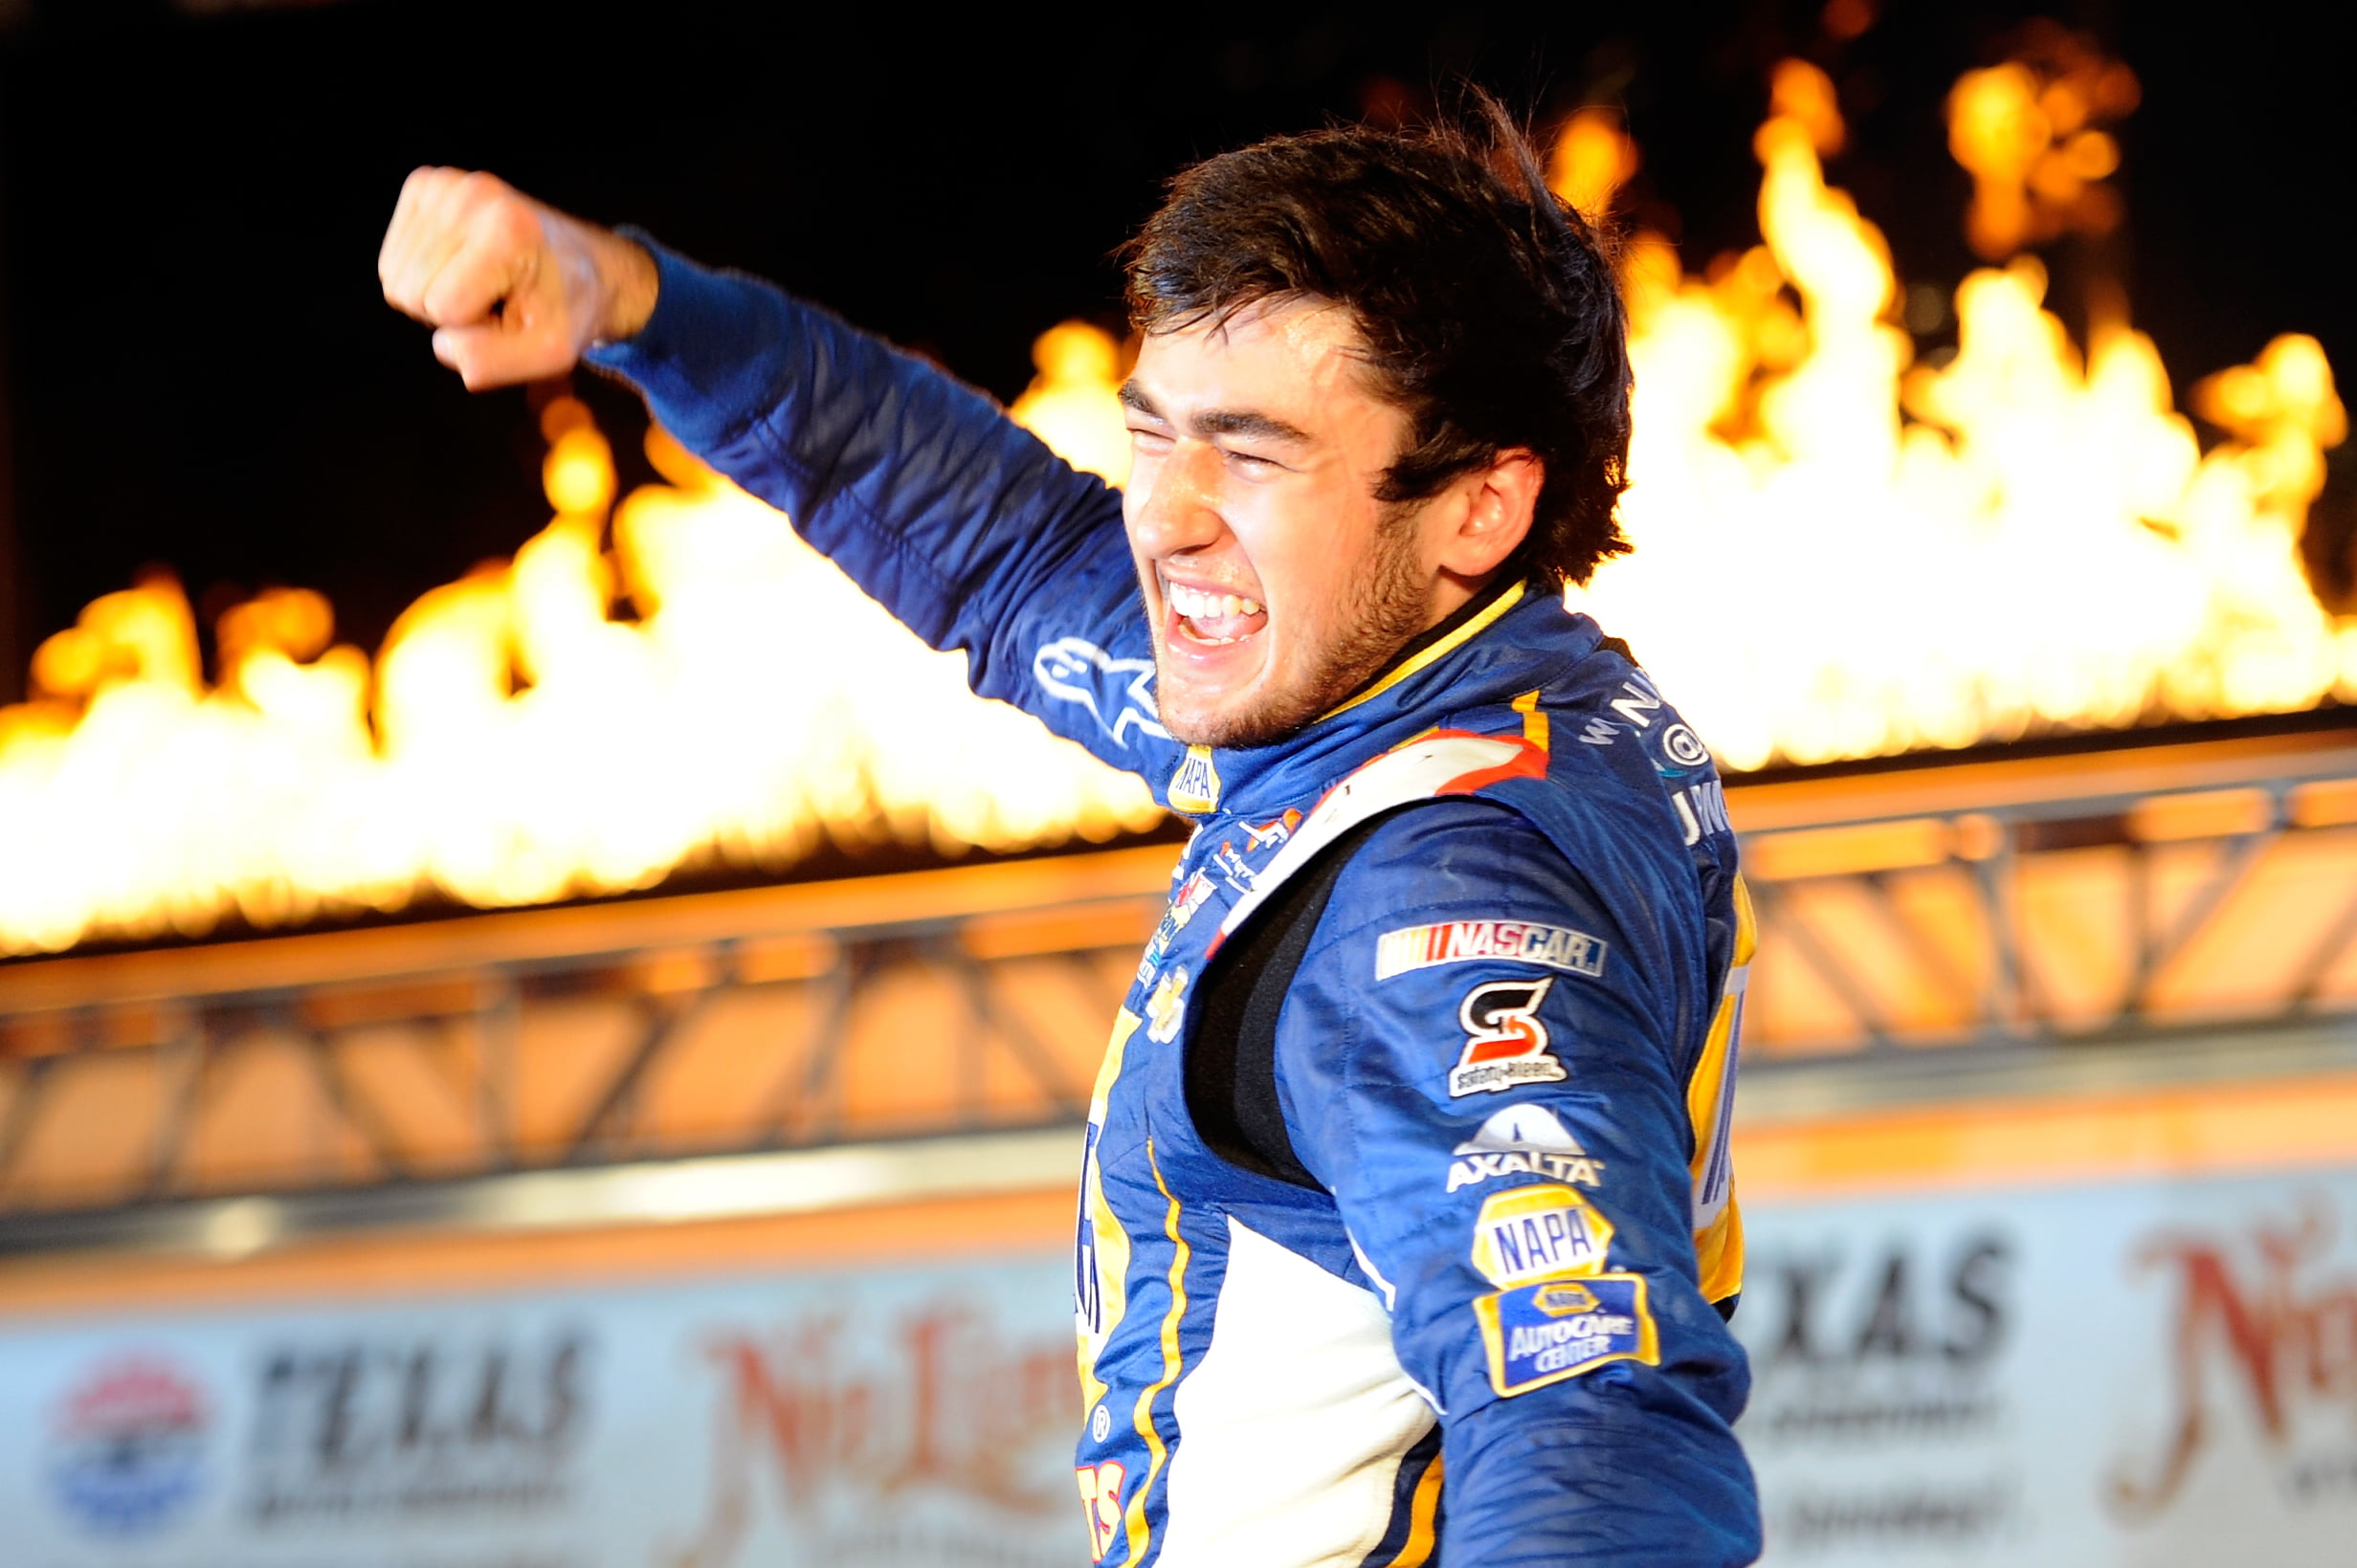 Chase Elliott wins first Nationwide Race